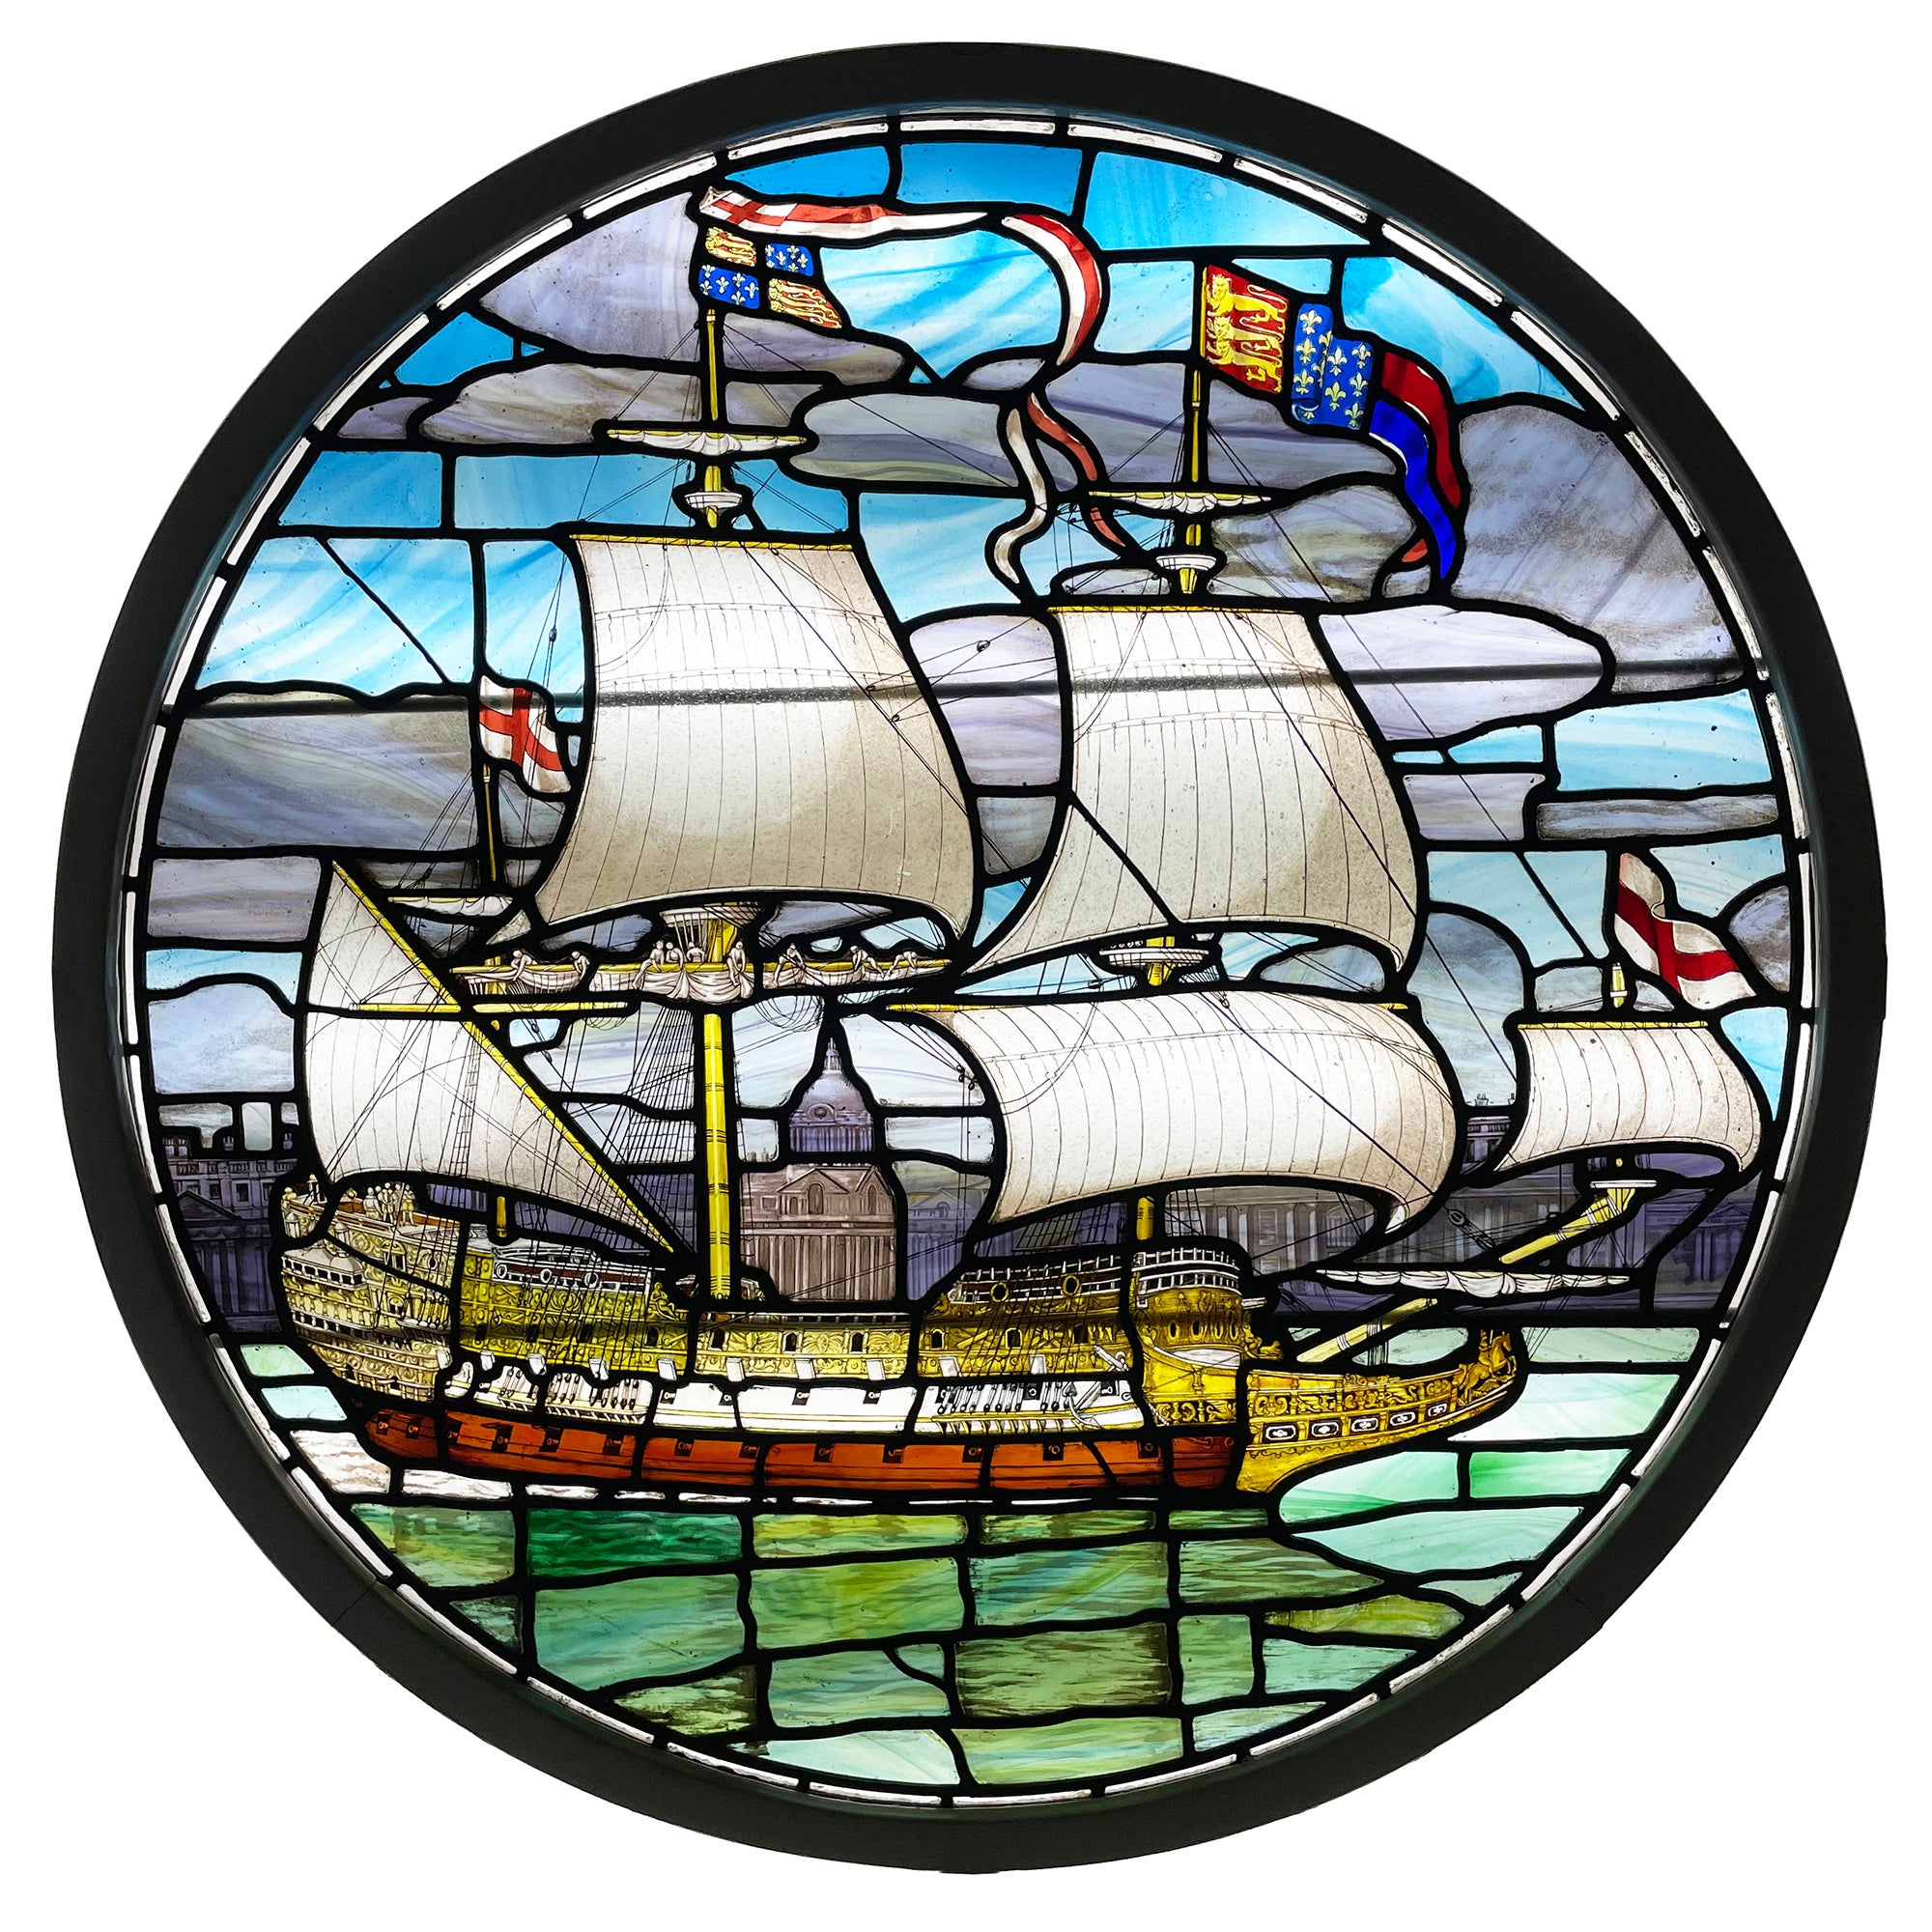 Antique English Stained Glass Window Depicting a Ship For Sale